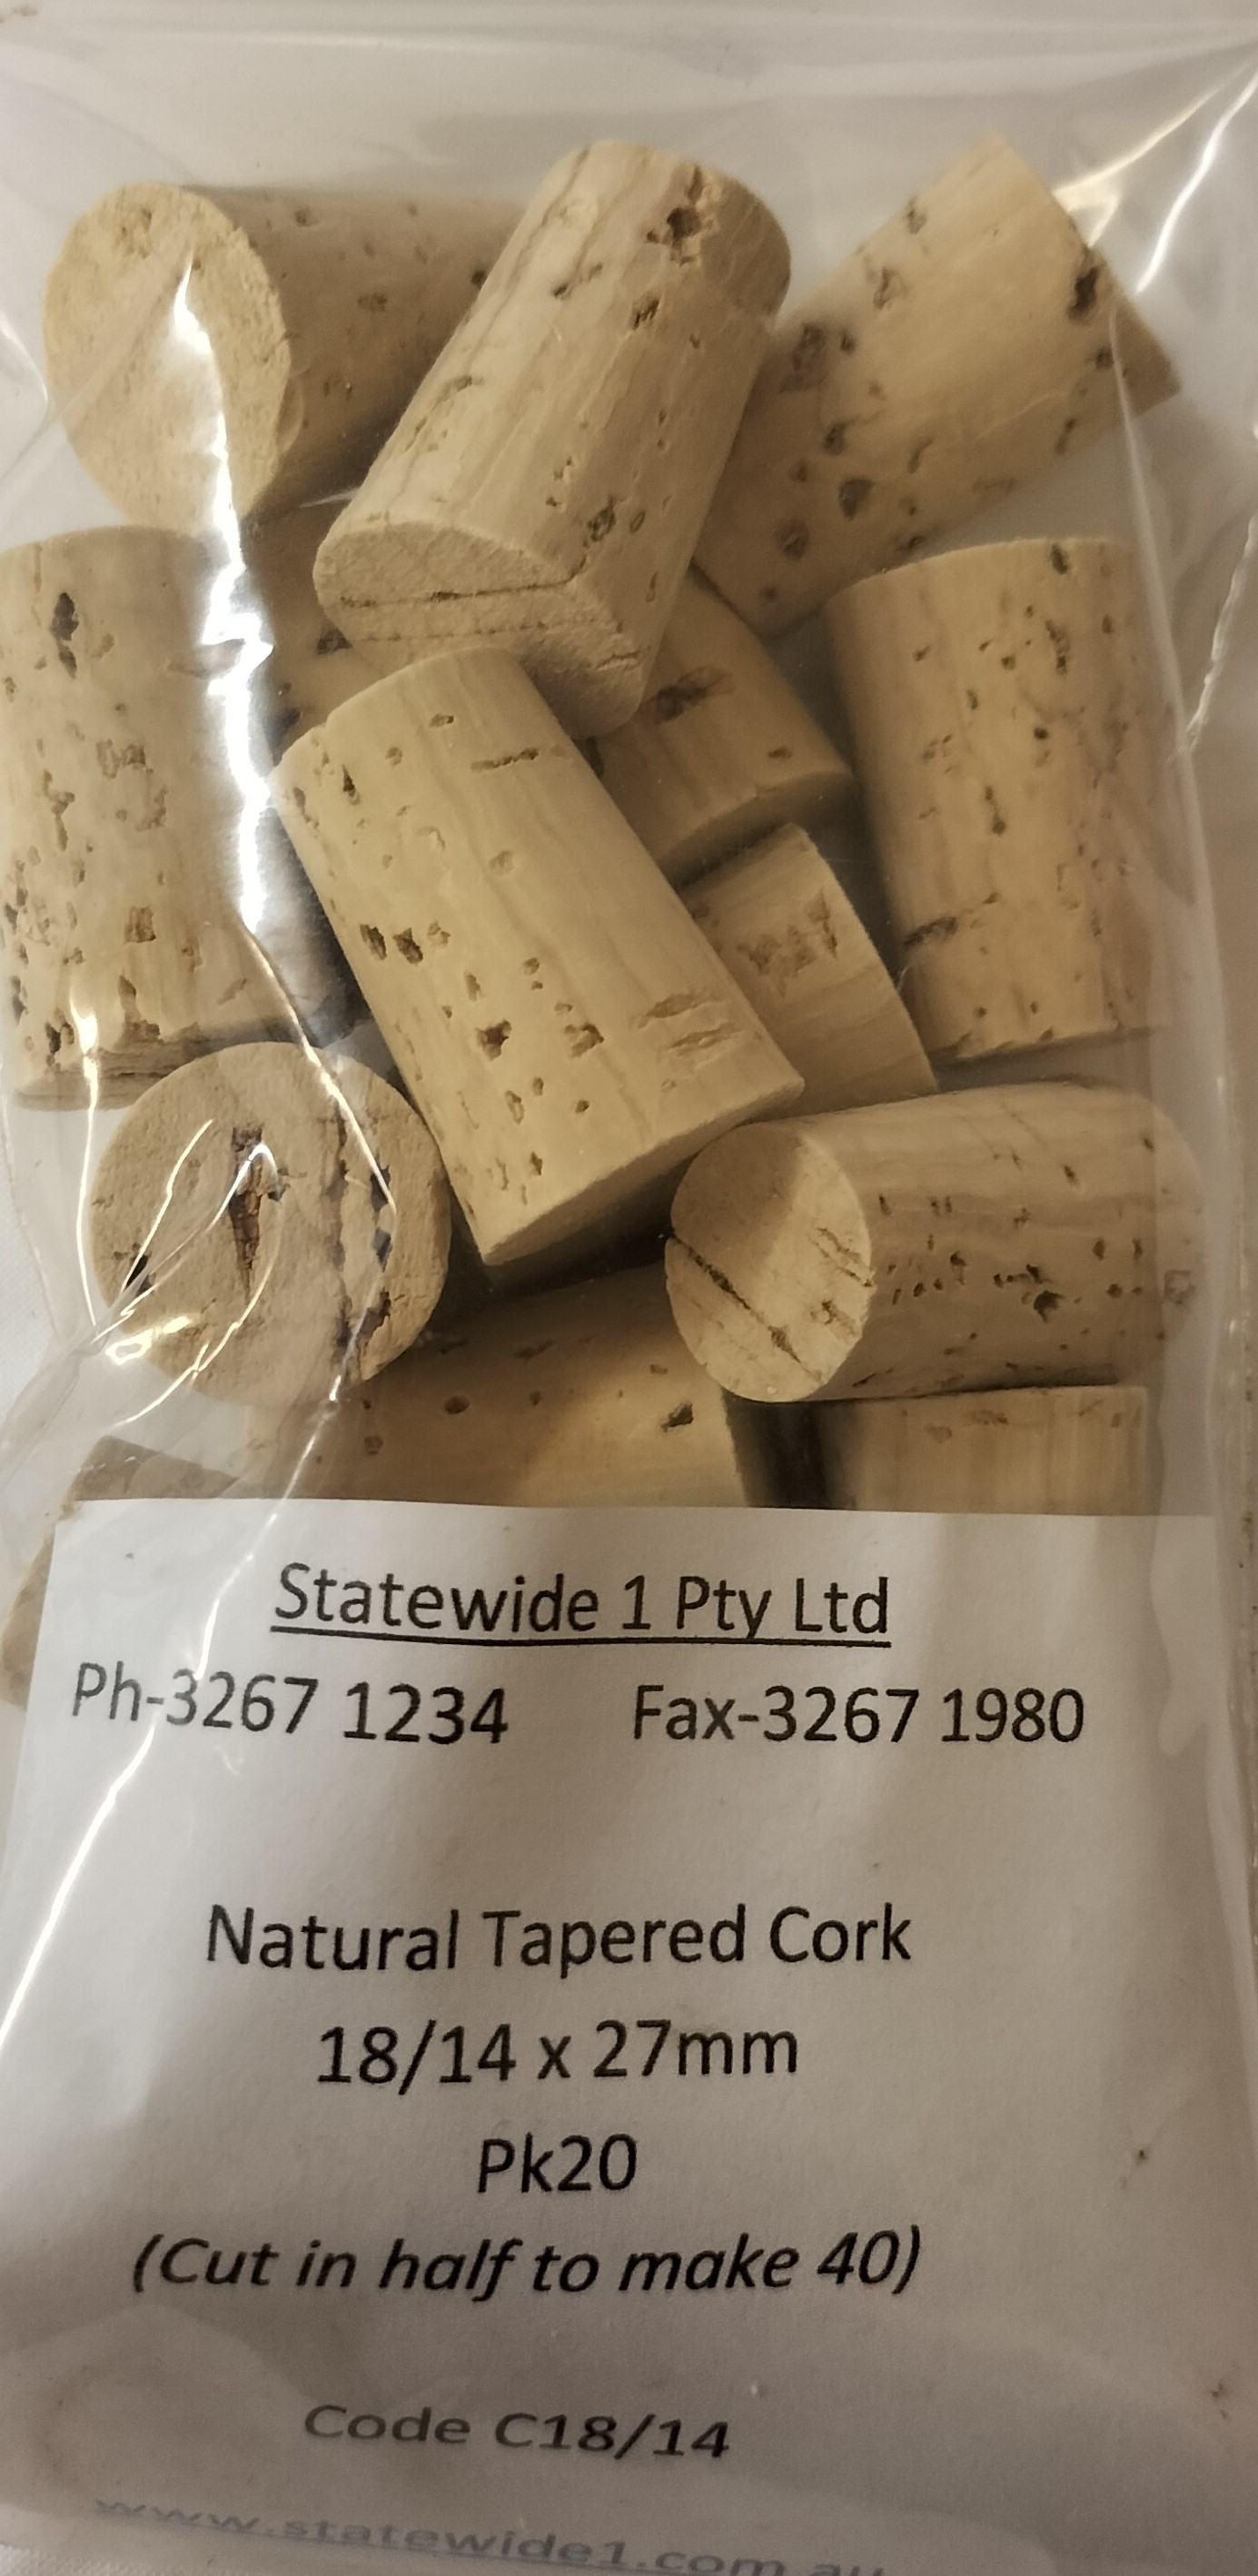 Corks Natural Tapered 18/14 x 27mm Pk20 (cut in half to make 40)